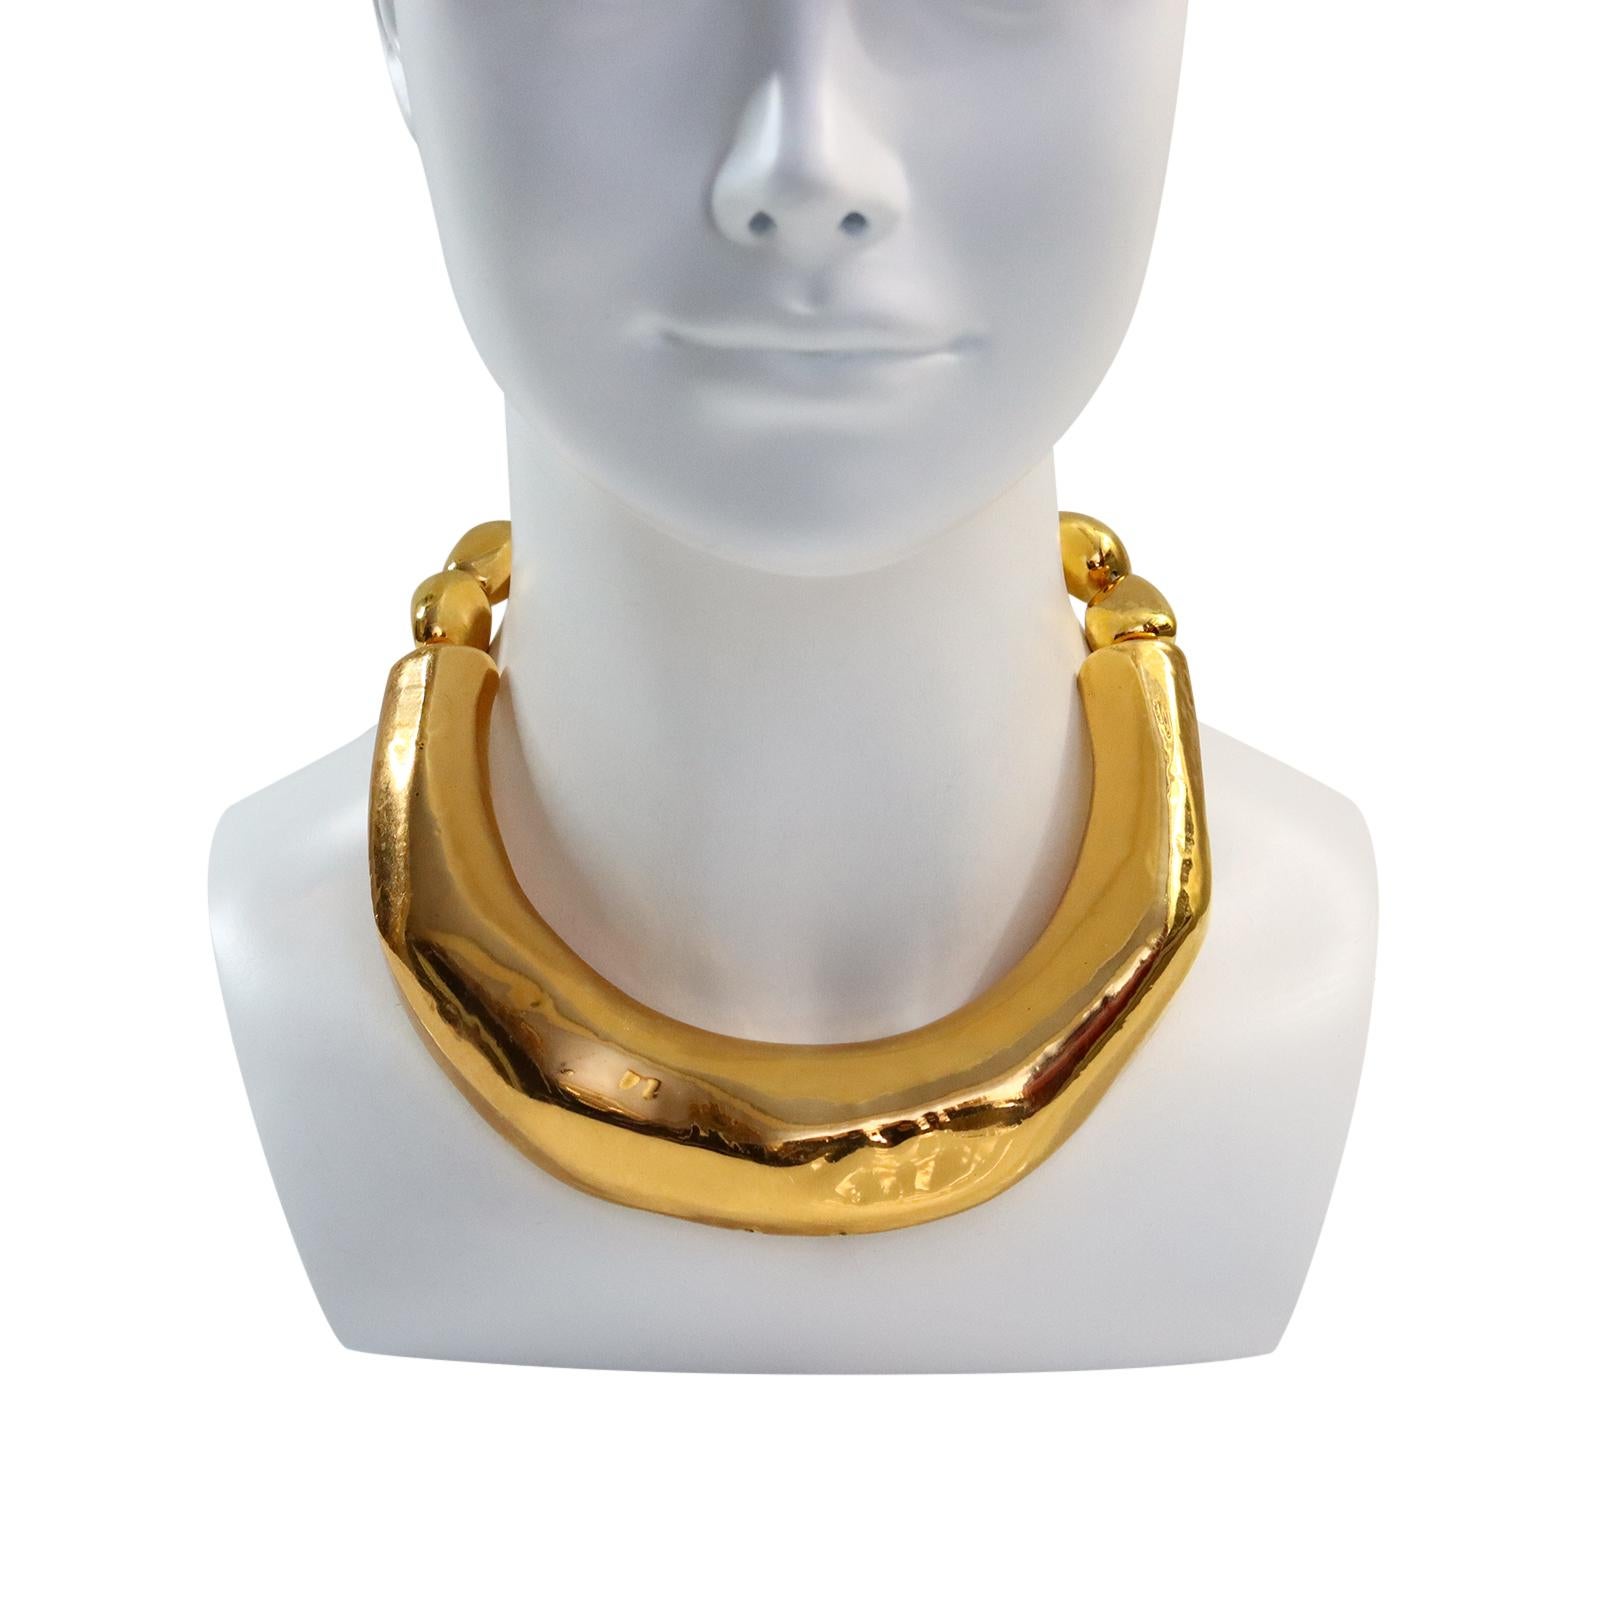 Artist Vintage Christian Lacroix Wide Resin Gold Choker Necklace Circa 1990s